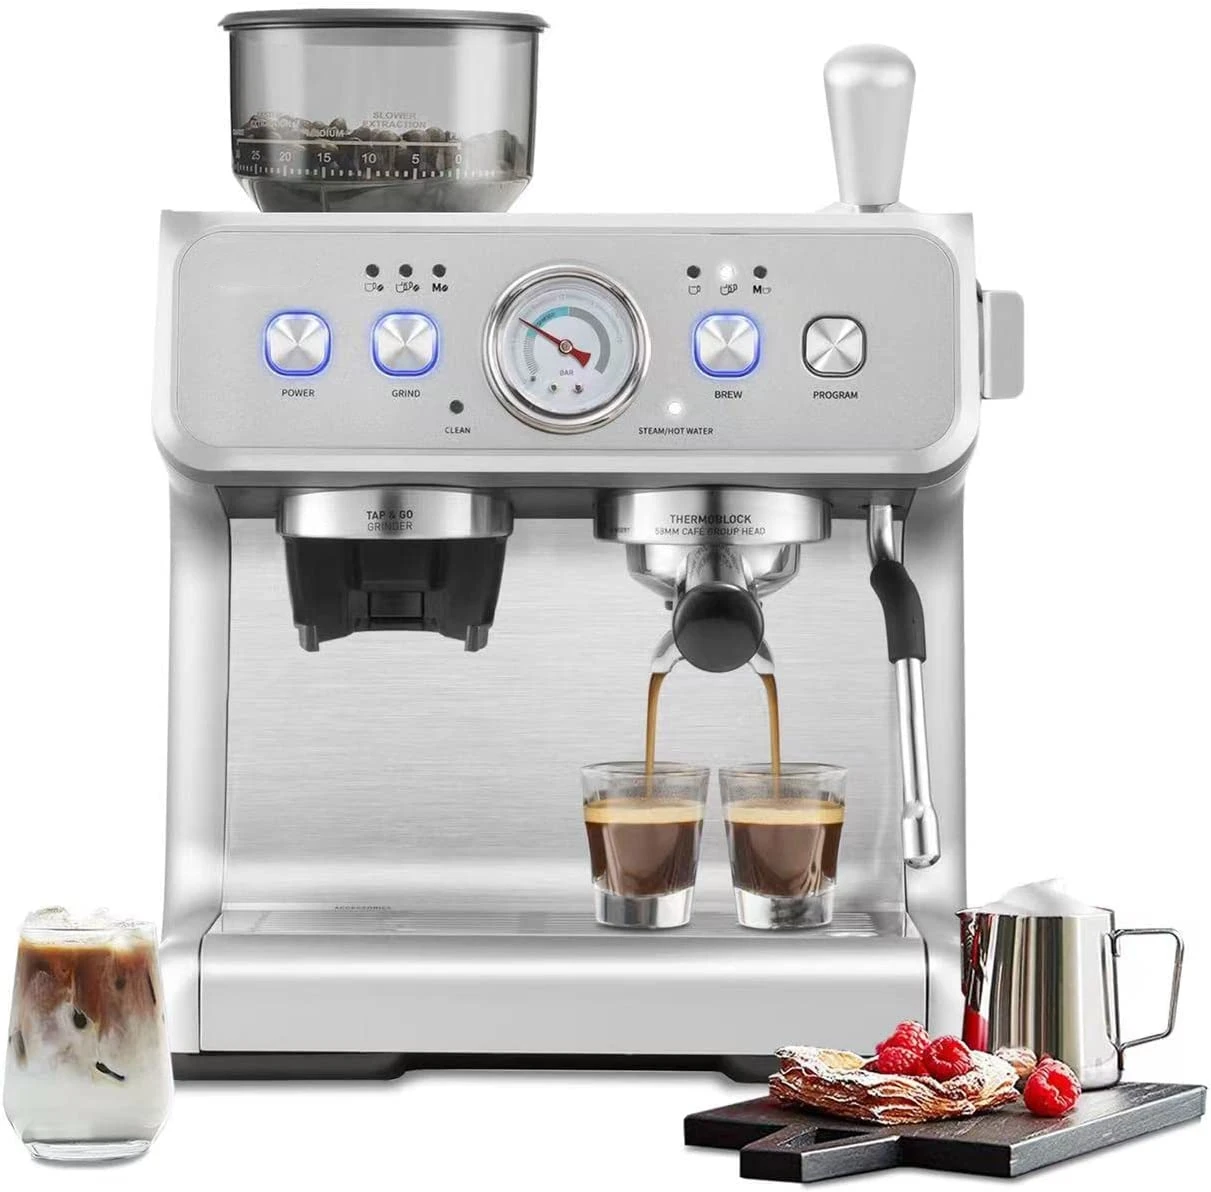 

Espresso Machines with Grinder-20 Bar Dual Boiler Automatic Coffee Machine with Milk Frother Wand for Cappuccino